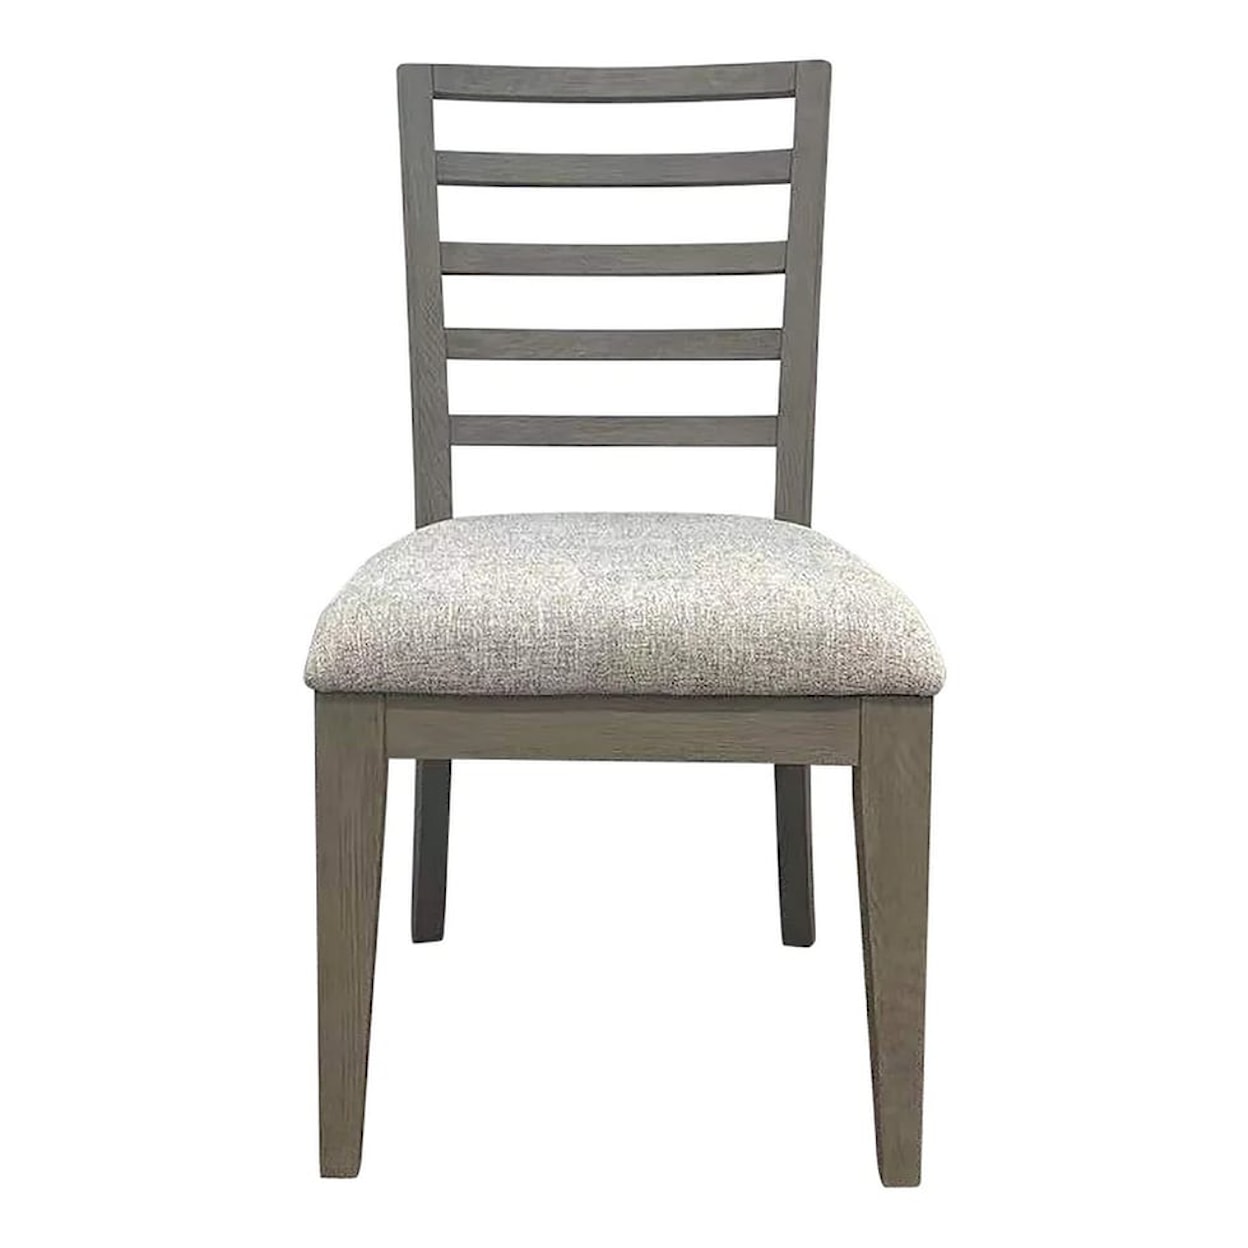 Paramount Furniture Pure Modern Upholstered Ladderback Dining Chair